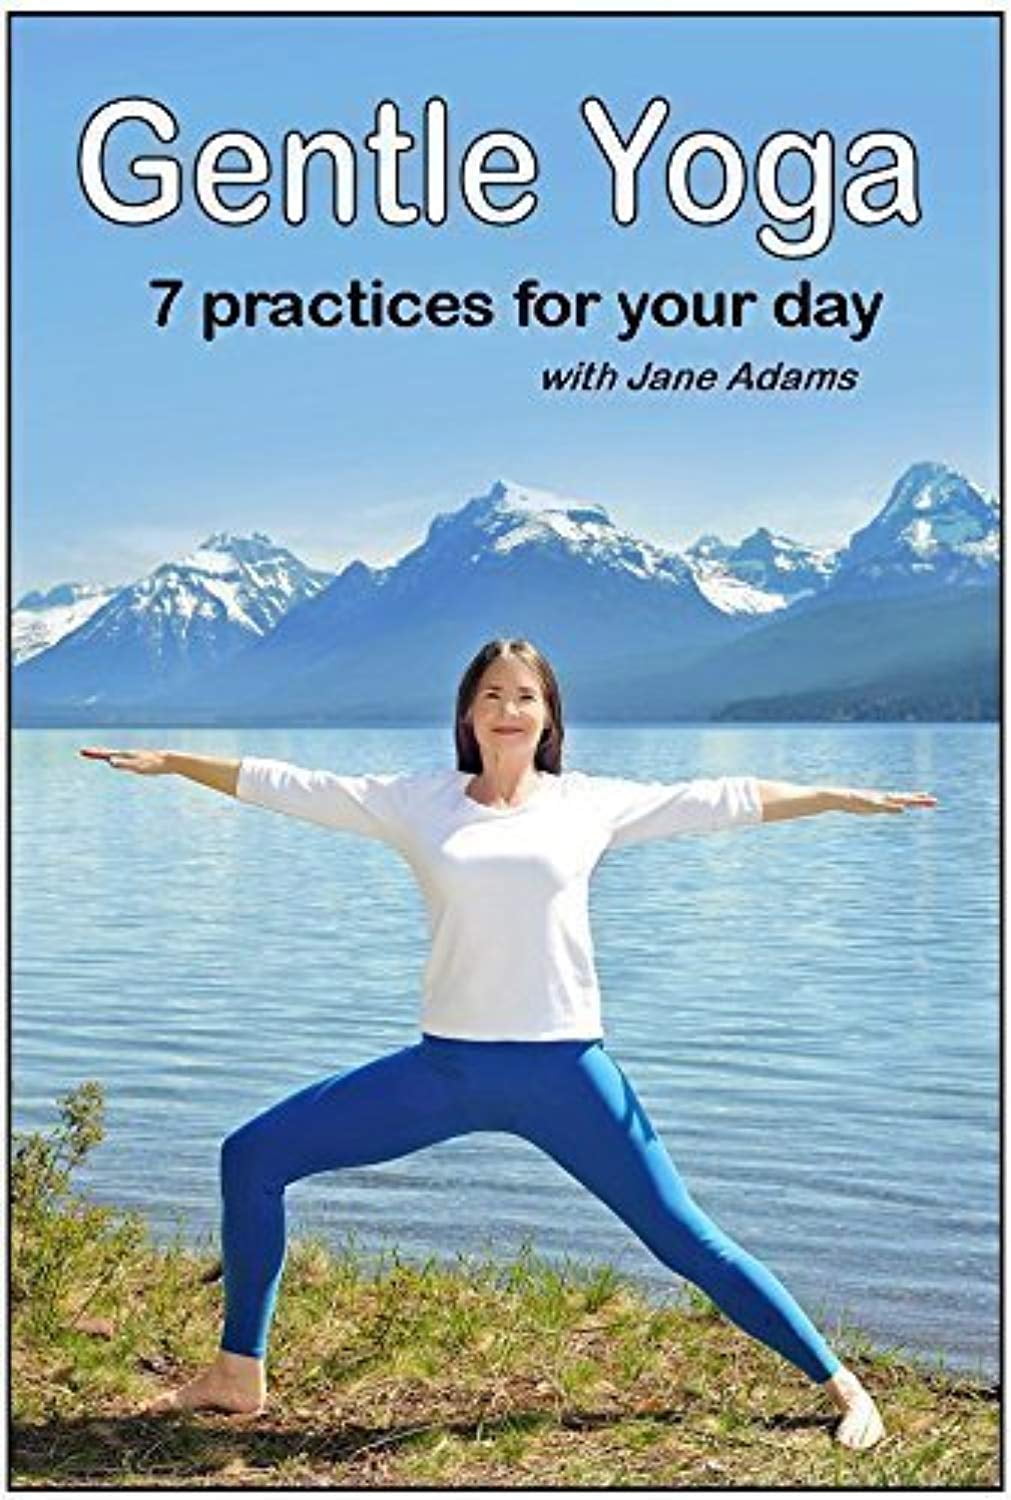 Gentle Yoga: 7 Beginning Yoga  for Mid-life (40's - 70's) including AM Energy, PM Relaxation, Improving Balance, Relief from Desk Work, Core Strength DVD